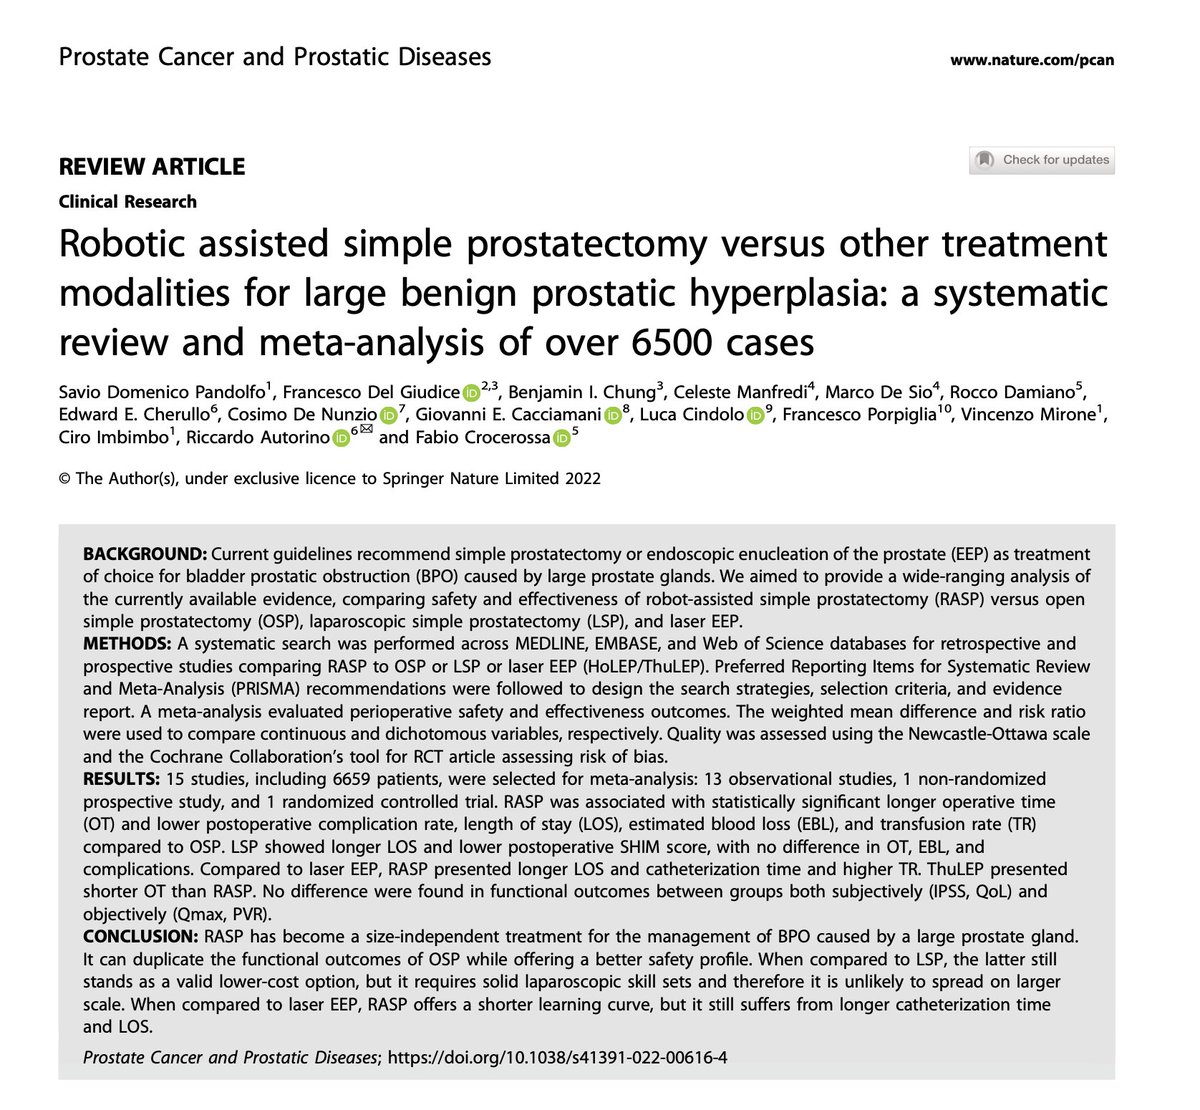 🤖RASP has become a size-independent treatment ✅Better safety profile & functional outcomes vs. OSP ✅Shorter learning curve 🚨longer catheter time & LOS vs. laser EEP 😉LSP still stands as a valid low-cost option 👉rb.gy/w2riw0 @pcan_journal @NaturePortfolio